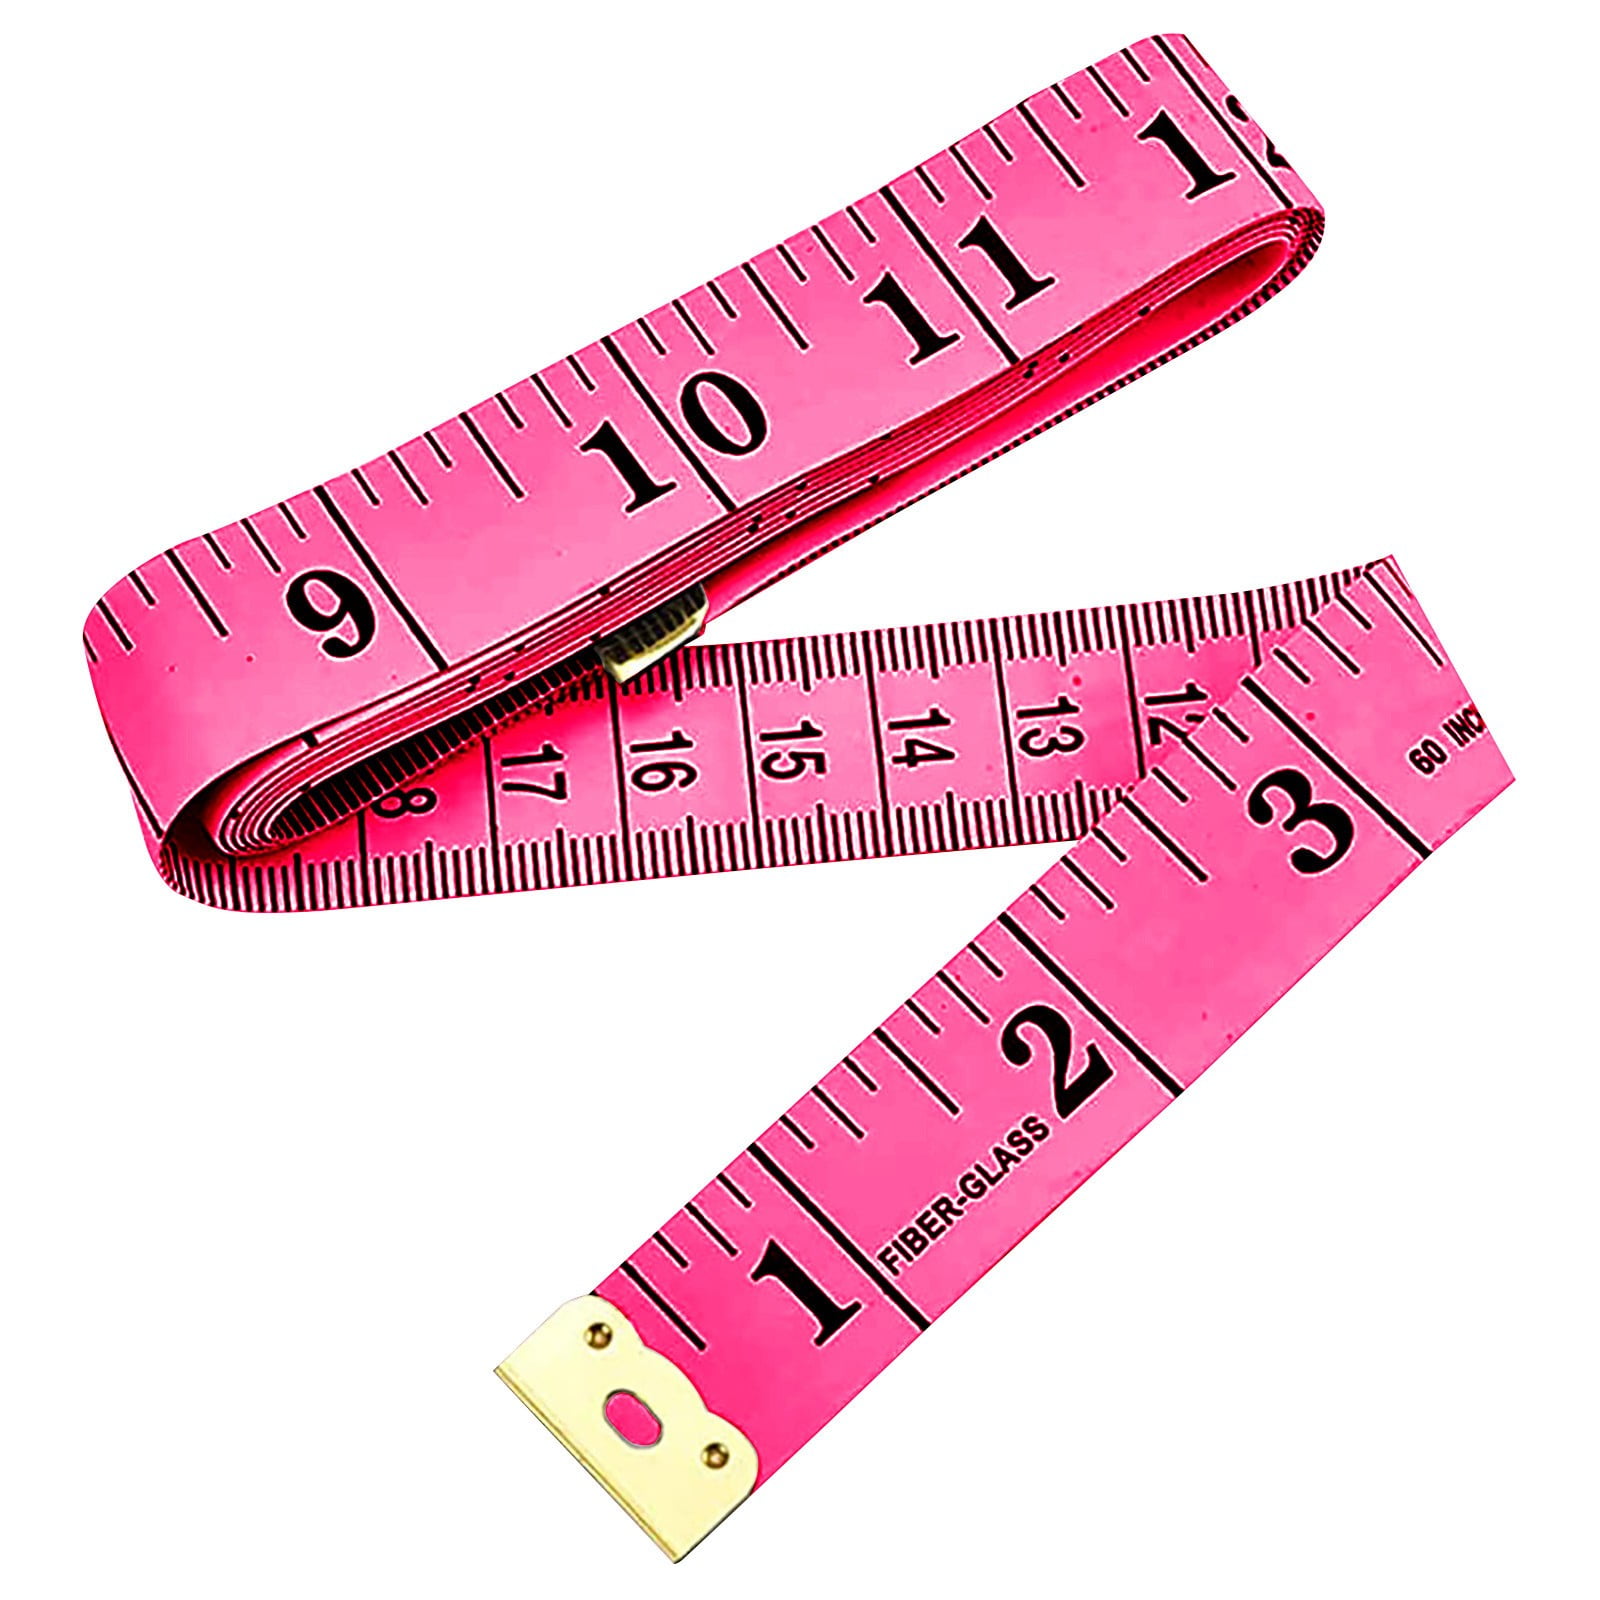 Wozhidaoke Measuring Tape for Body Fabric Sewing Tailor Cloth Knitting Home Craft Measureme, Size: One size, Pink